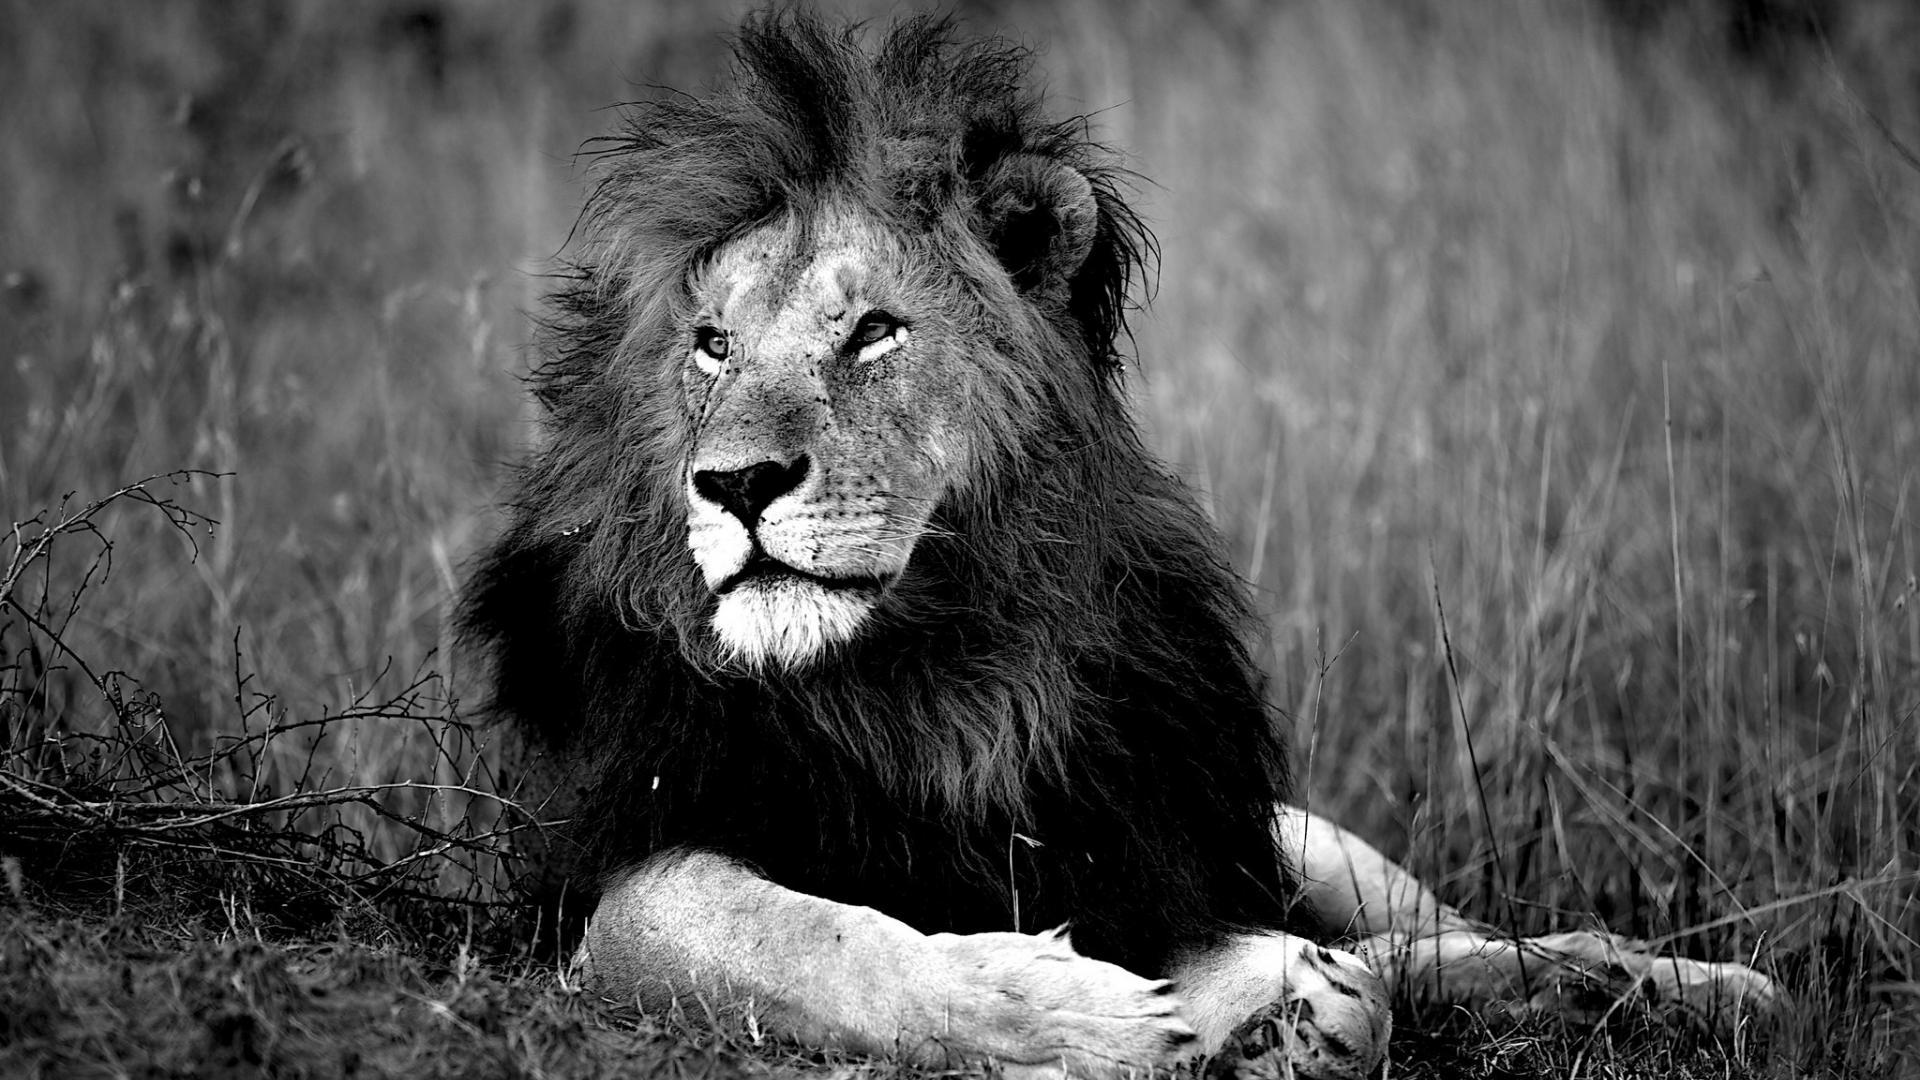 Black And White Lion Wallpapers Wallpaper Cave